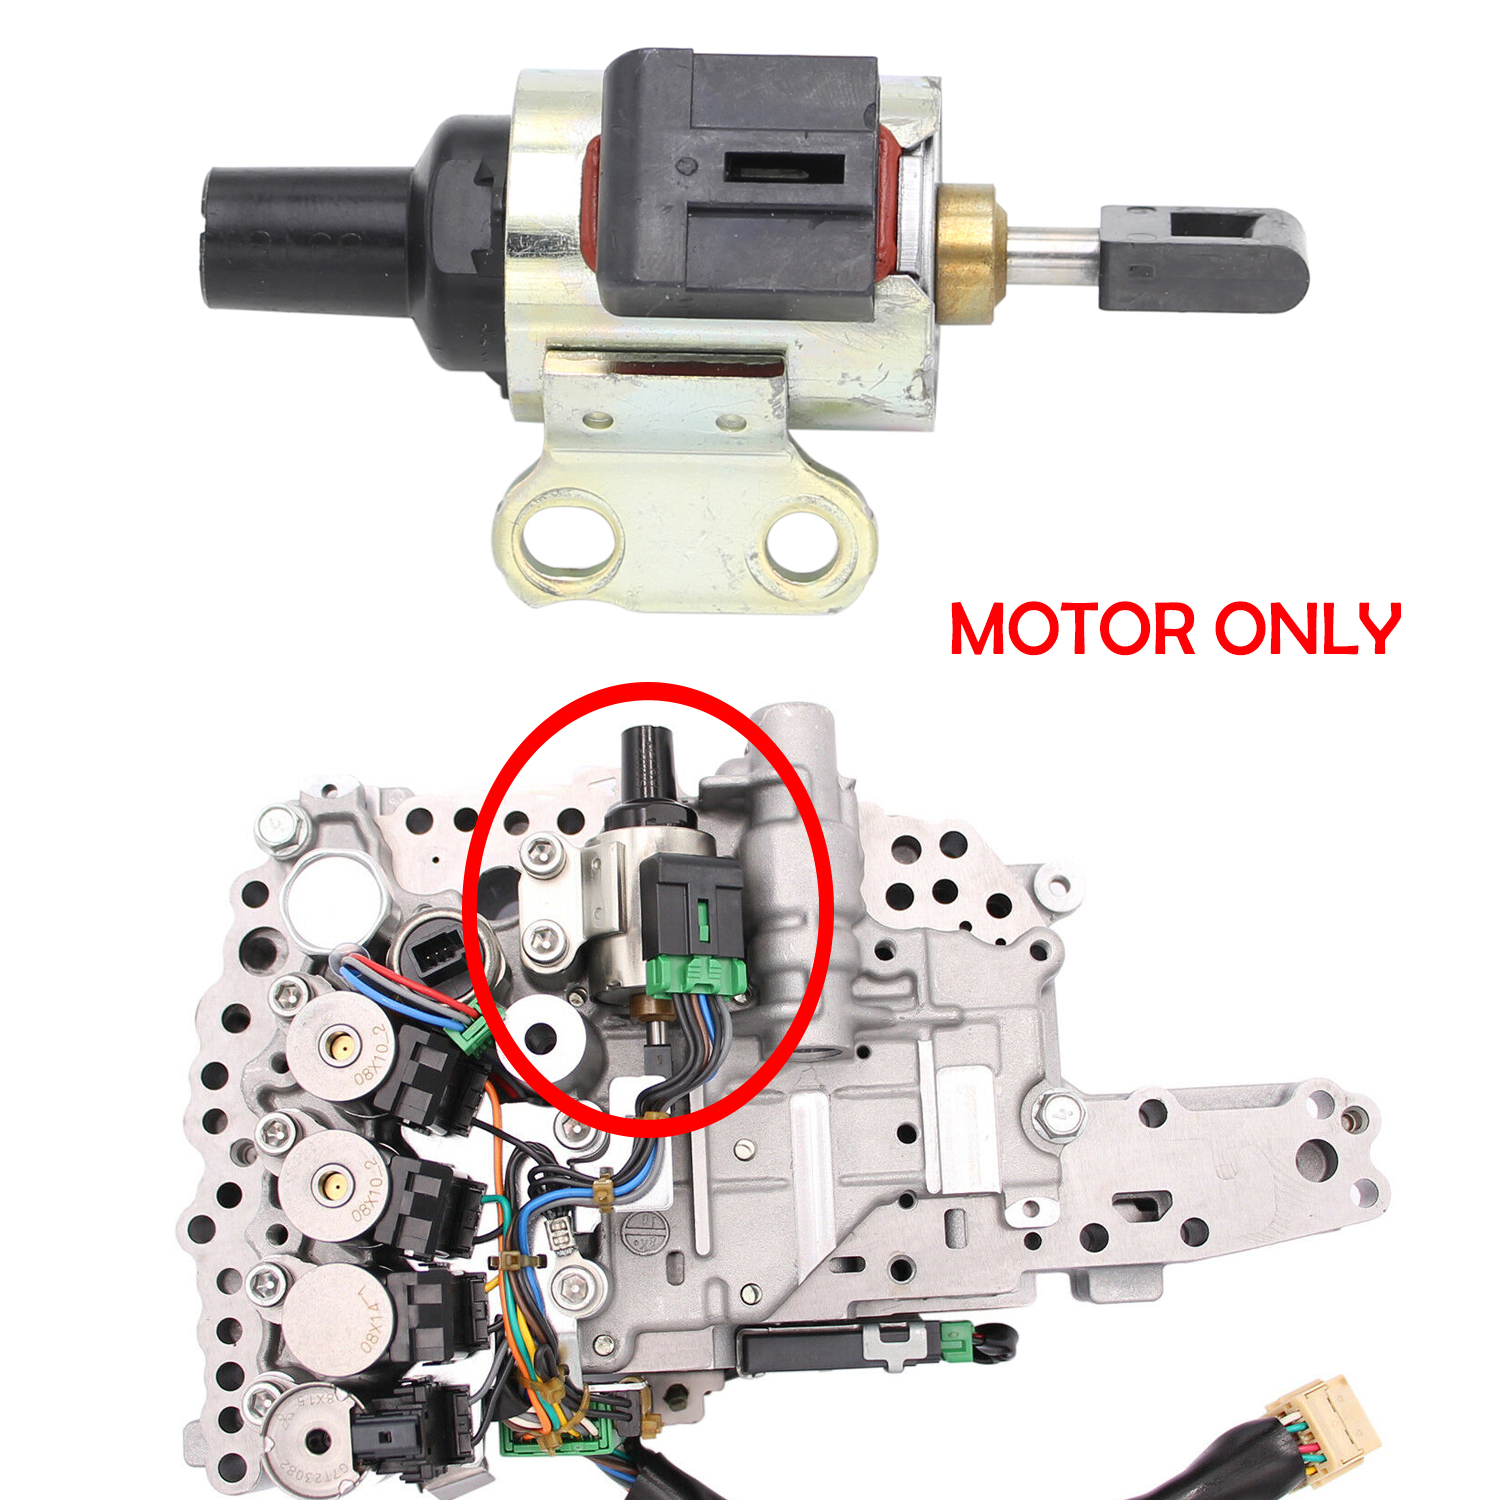 2008 nissan altima transmission replacement cost